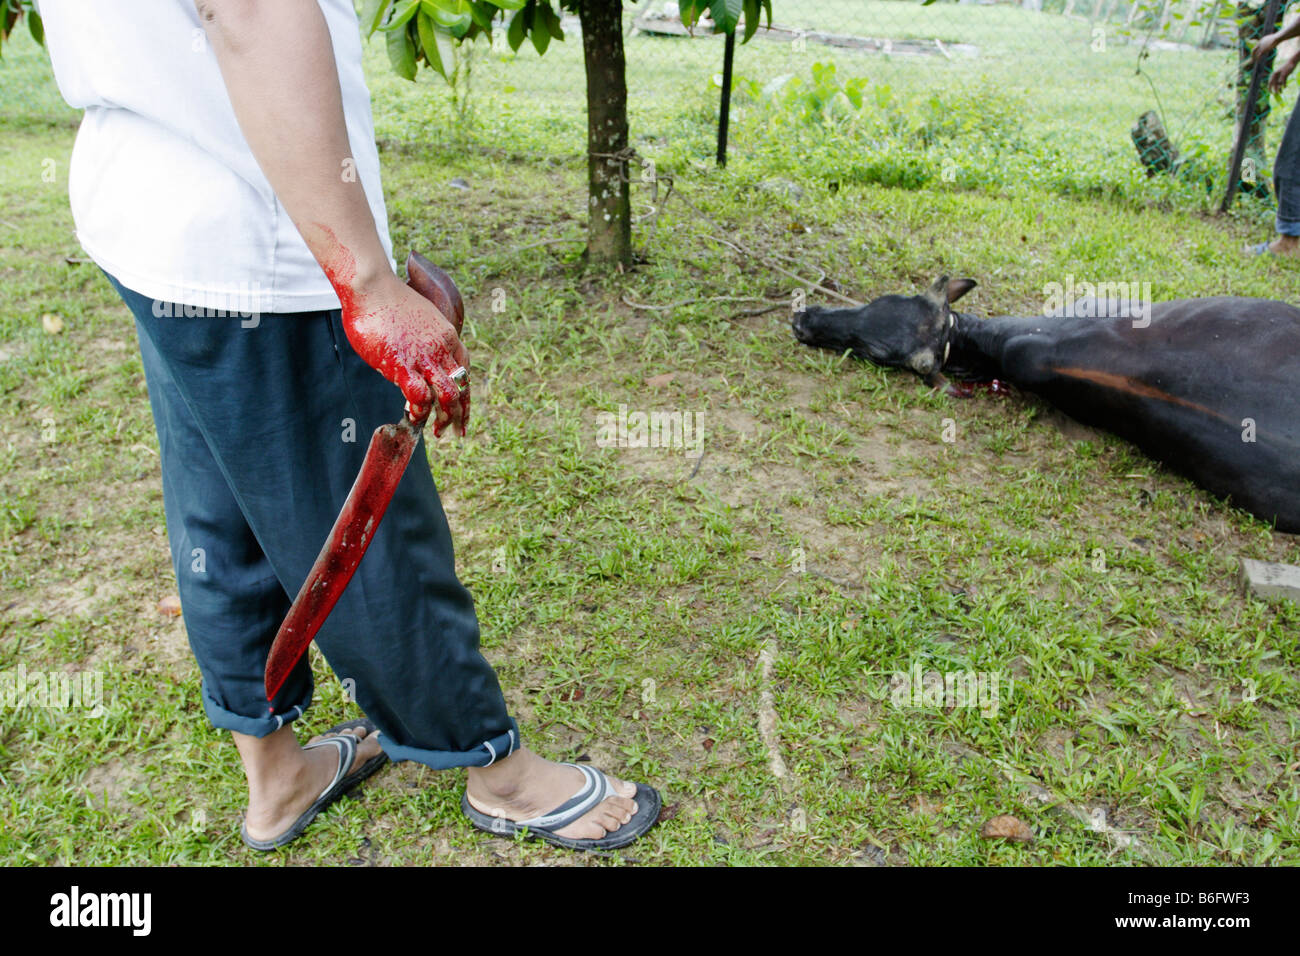 Blood stained knife after slaughtering a cow. Stock Photo